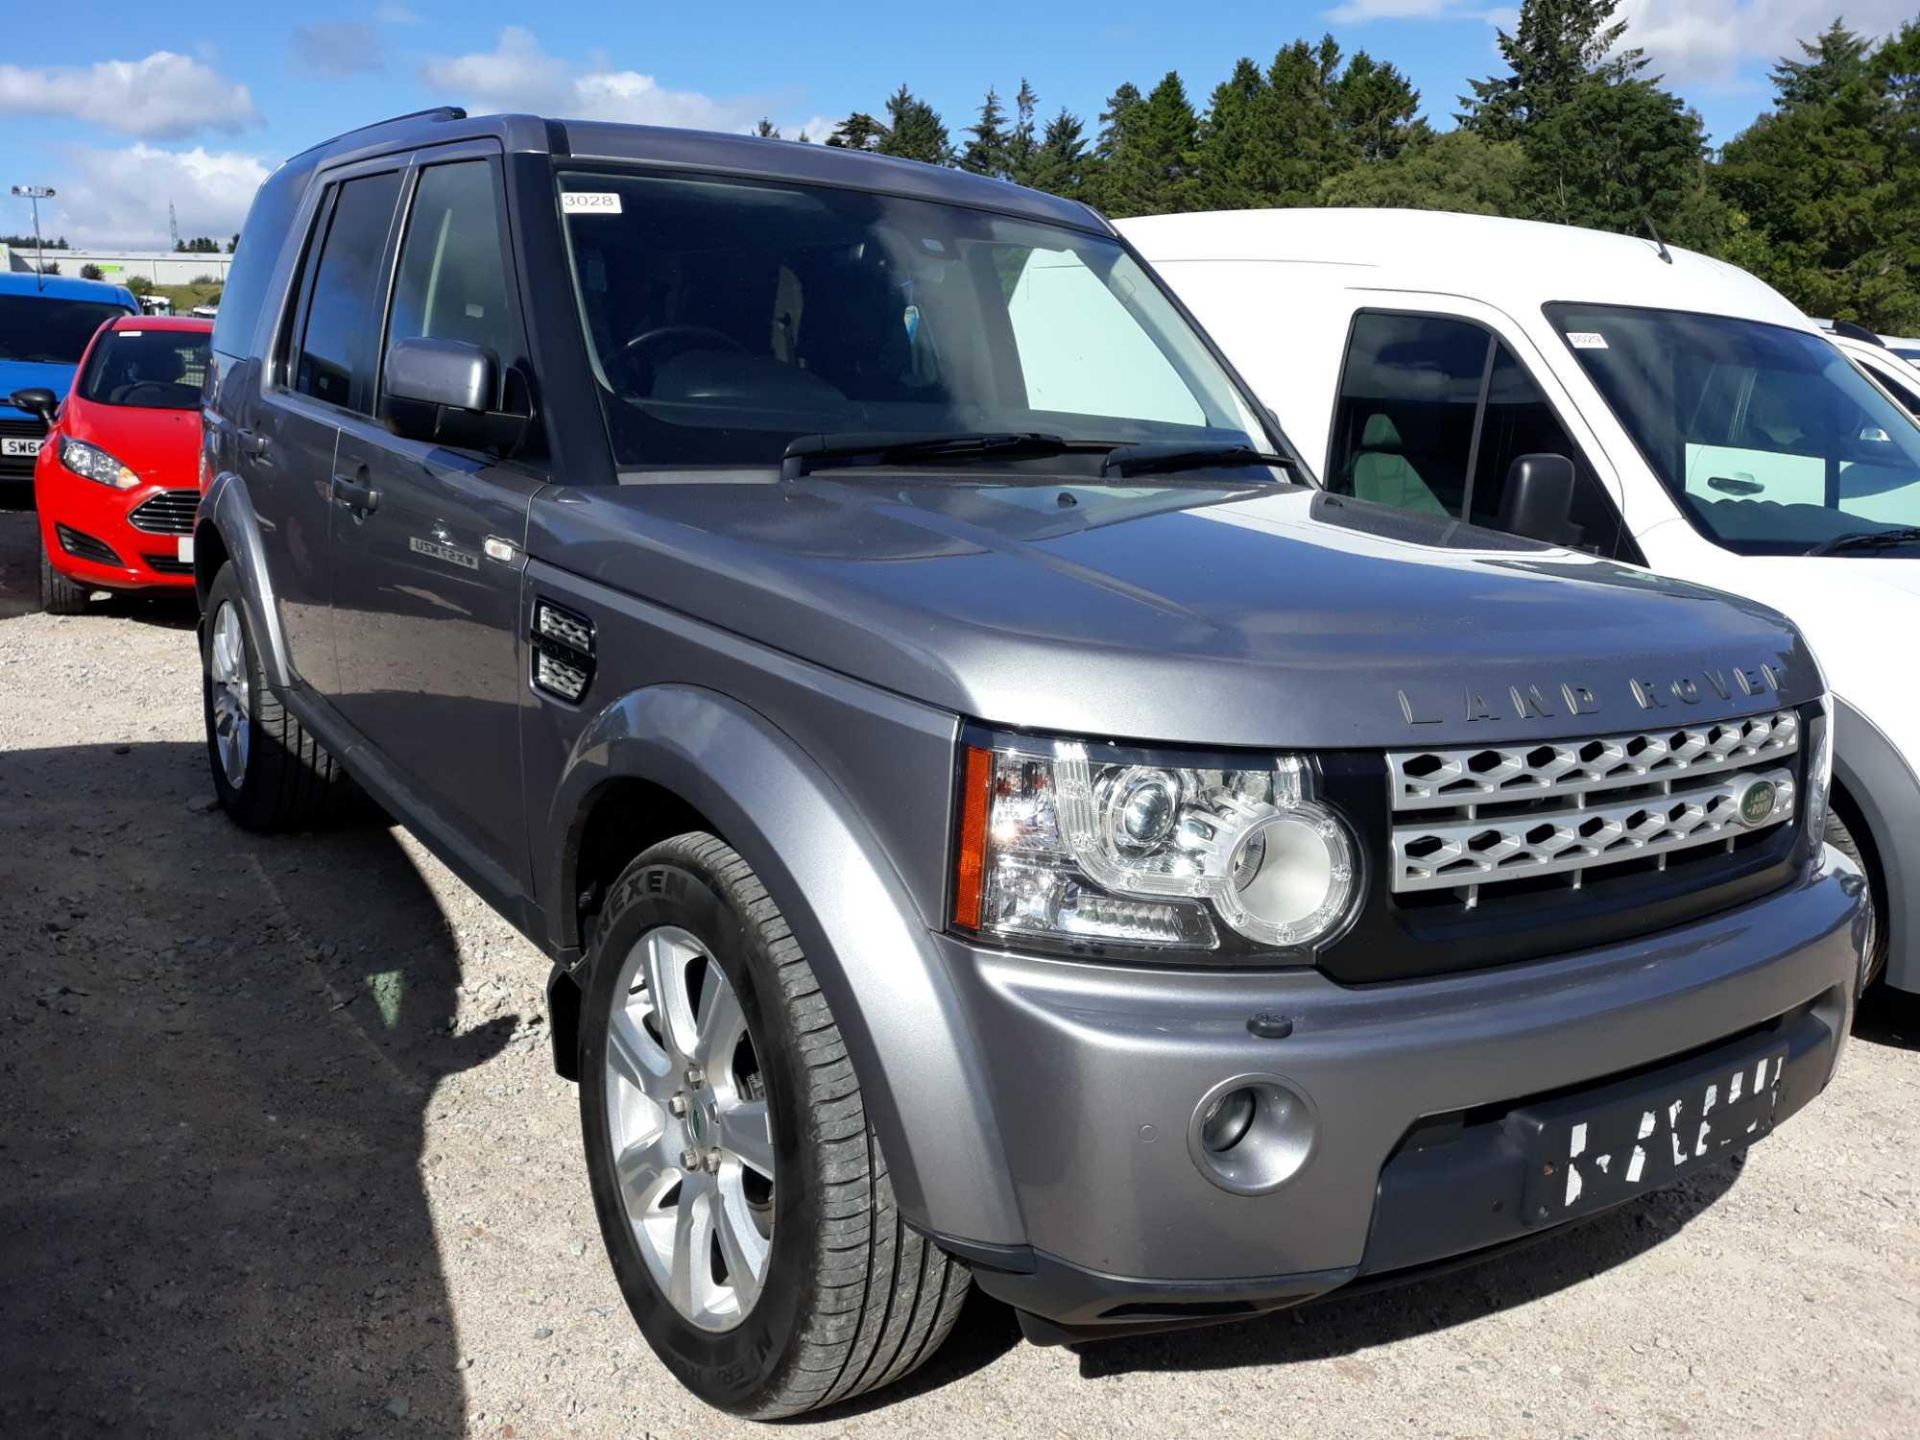 Land Rover Discovery Hse Sdv6 Auto - 2993cc Estate - Image 3 of 8